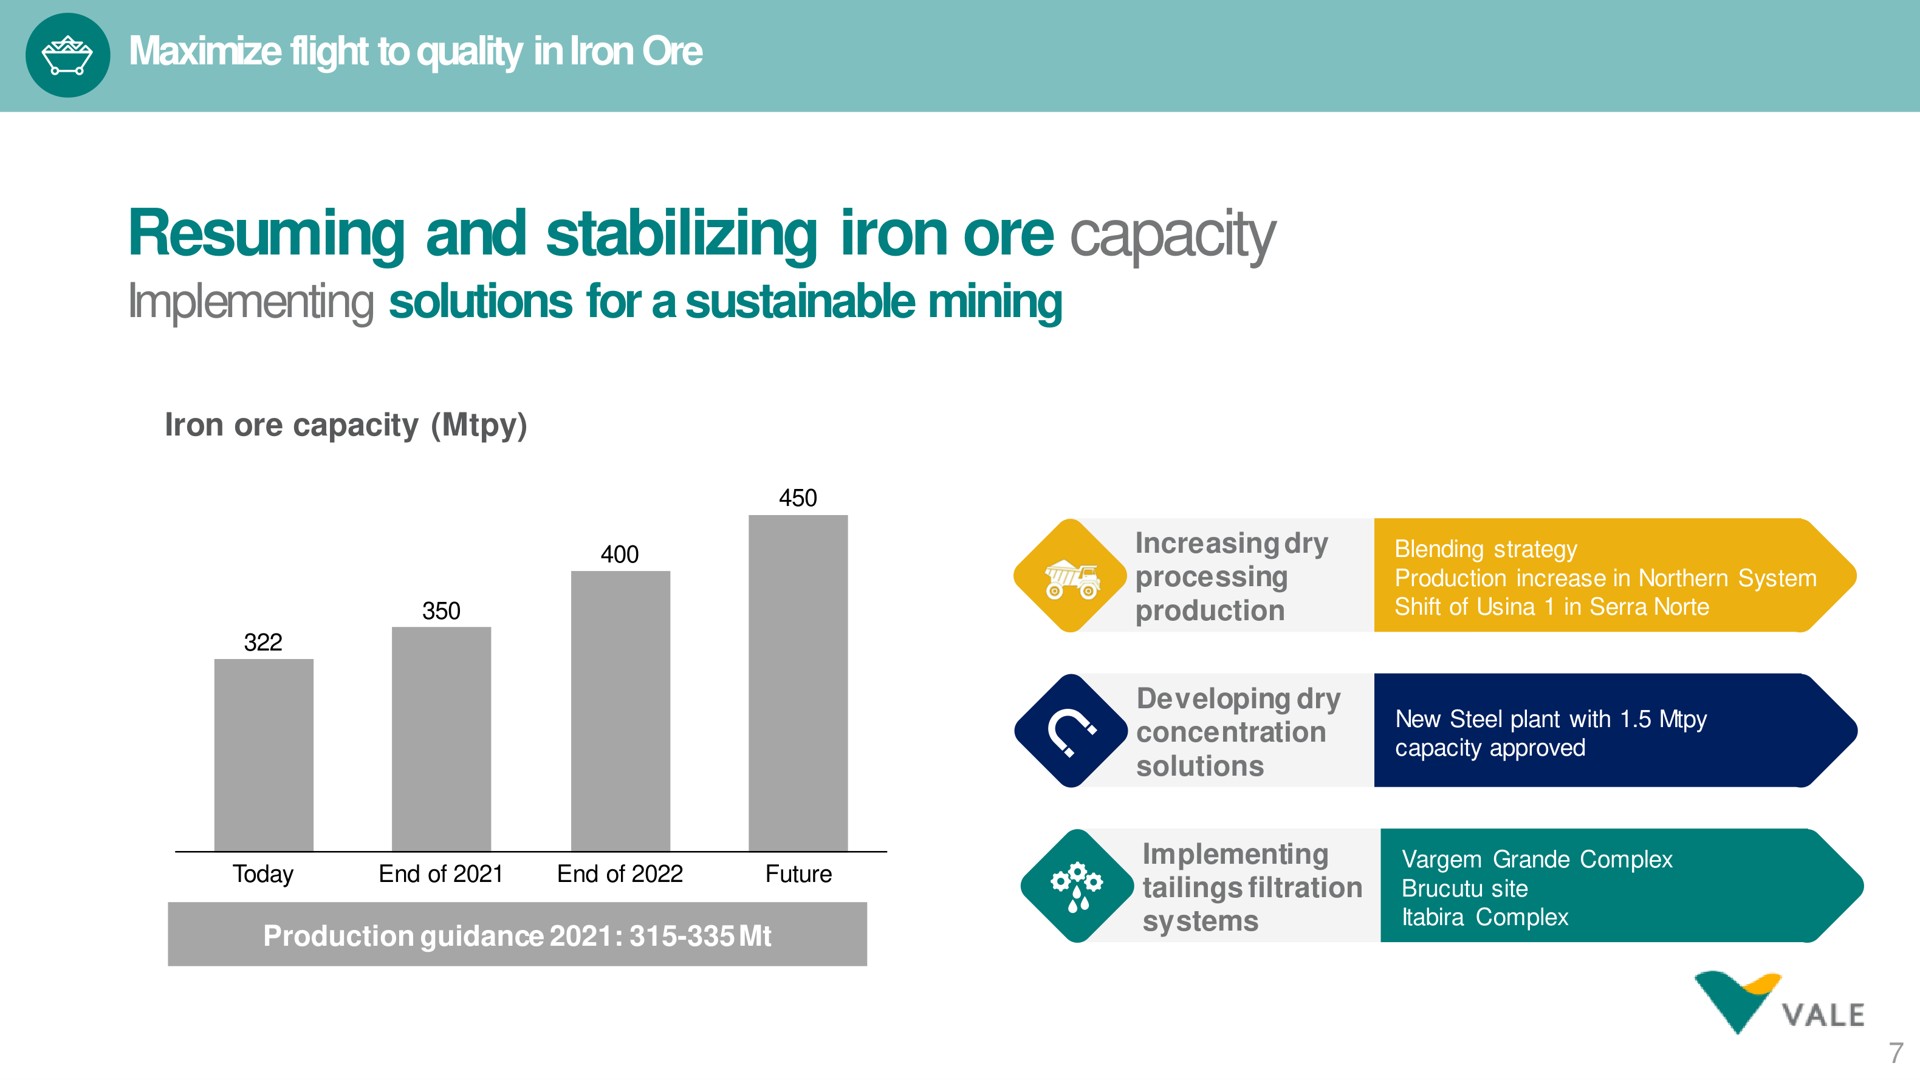 maximize flight to quality in iron ore resuming and stabilizing iron ore capacity implementing solutions for a sustainable mining | Vale